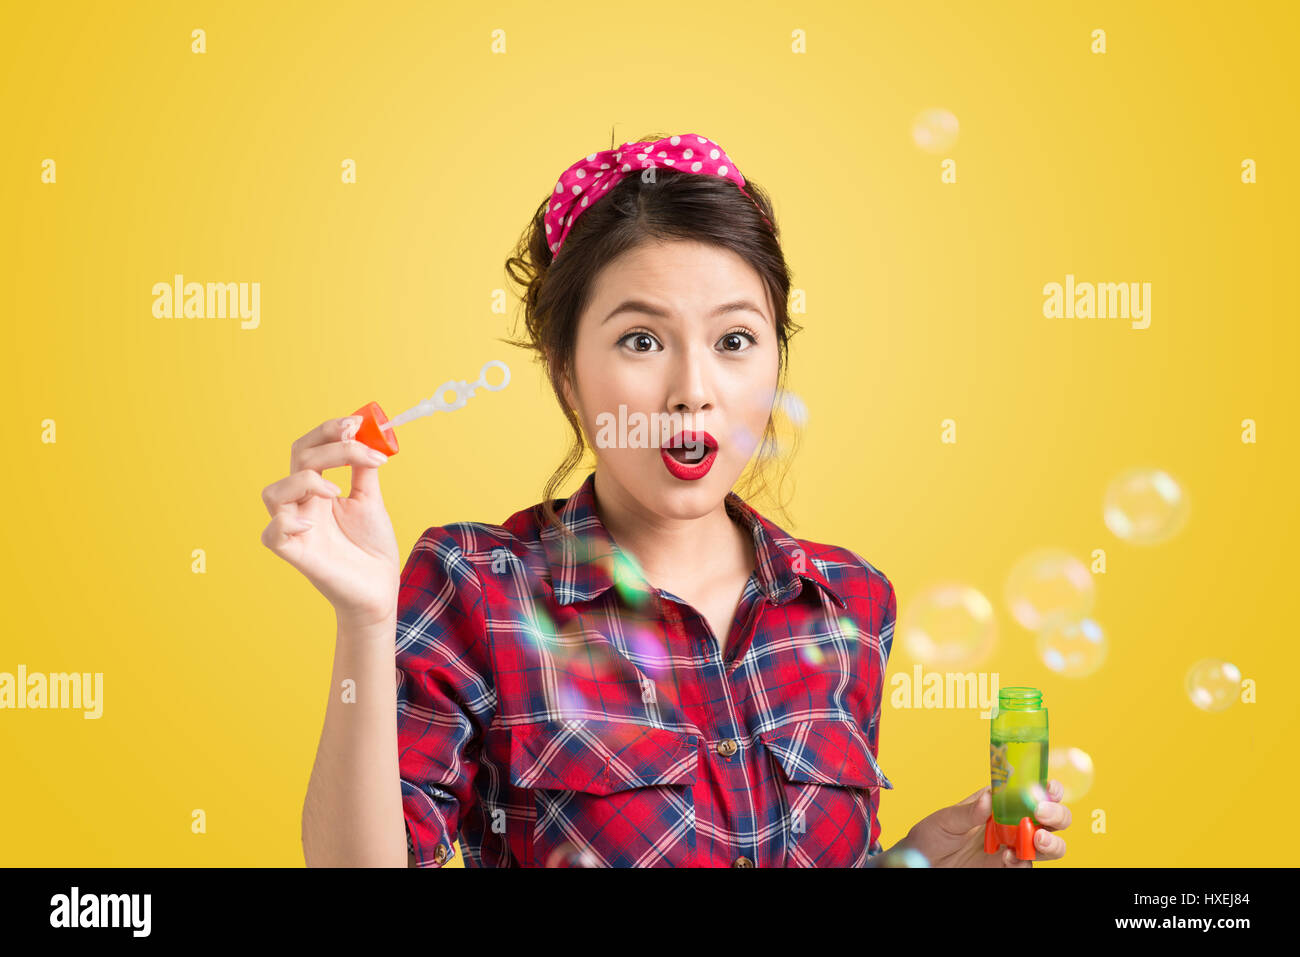 Pinup model blowing soap bubbles over yellow background. Stock Photo